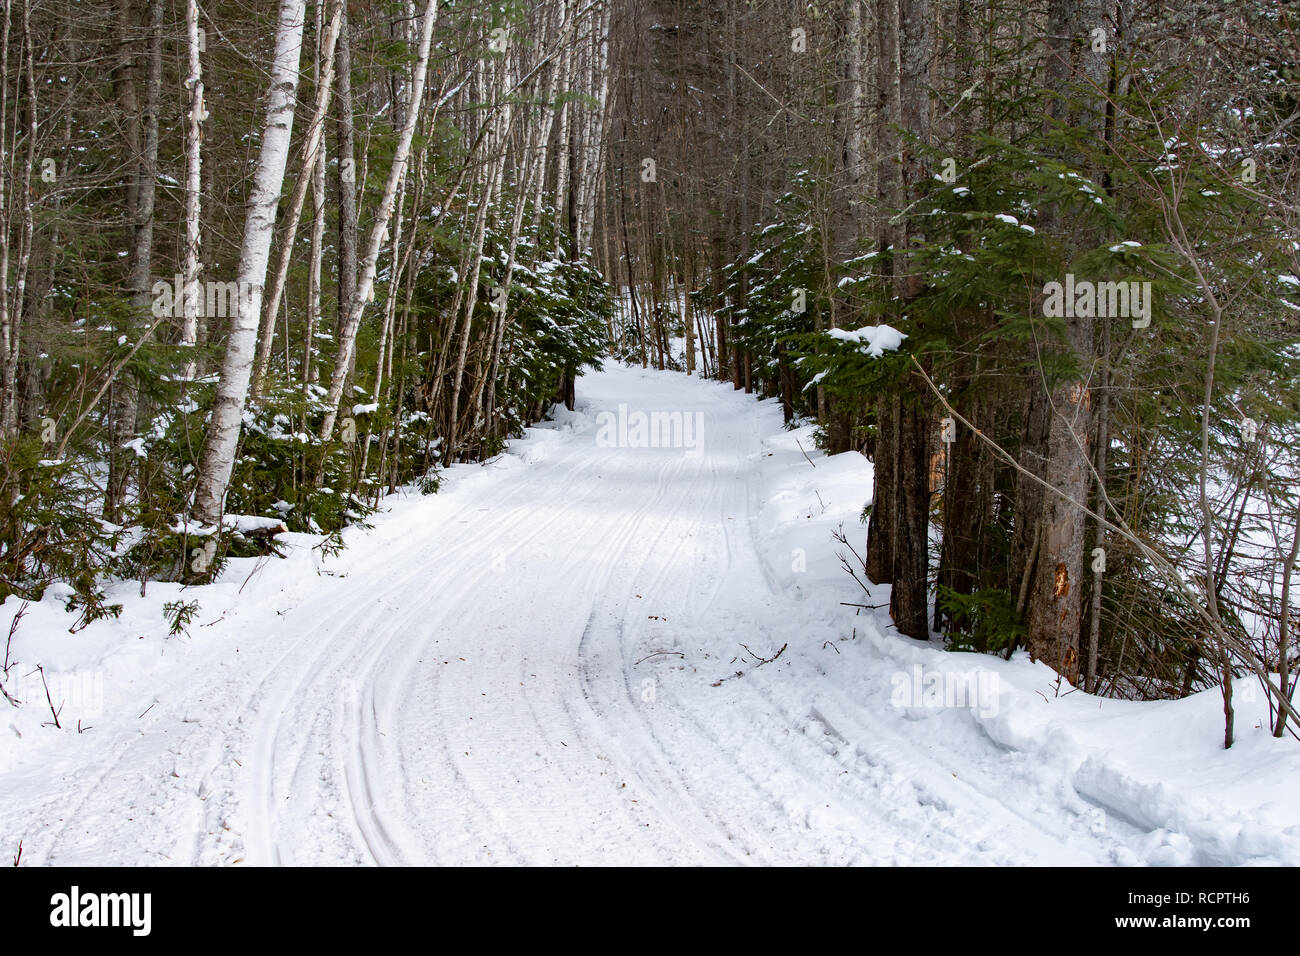 A freshly groomed snowmobile trail through the Adirondack Mountains wilderness near Speculator, NY USA. Stock Photo